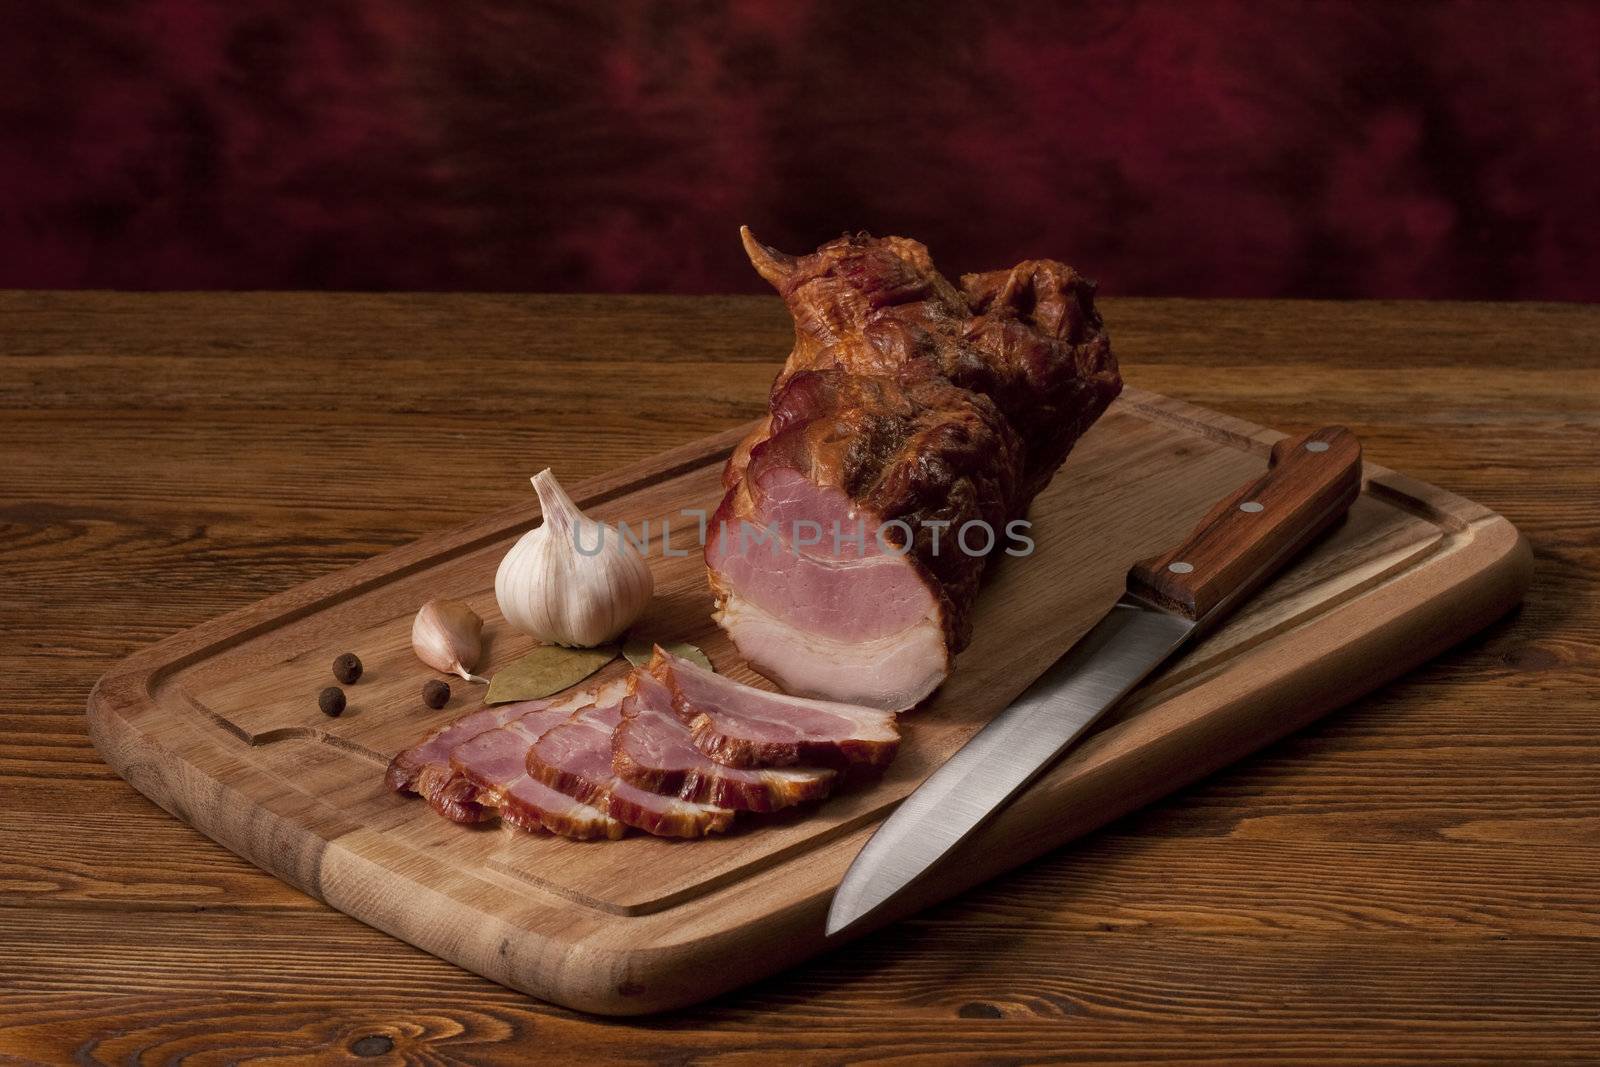 Composition with smoked ham on the table